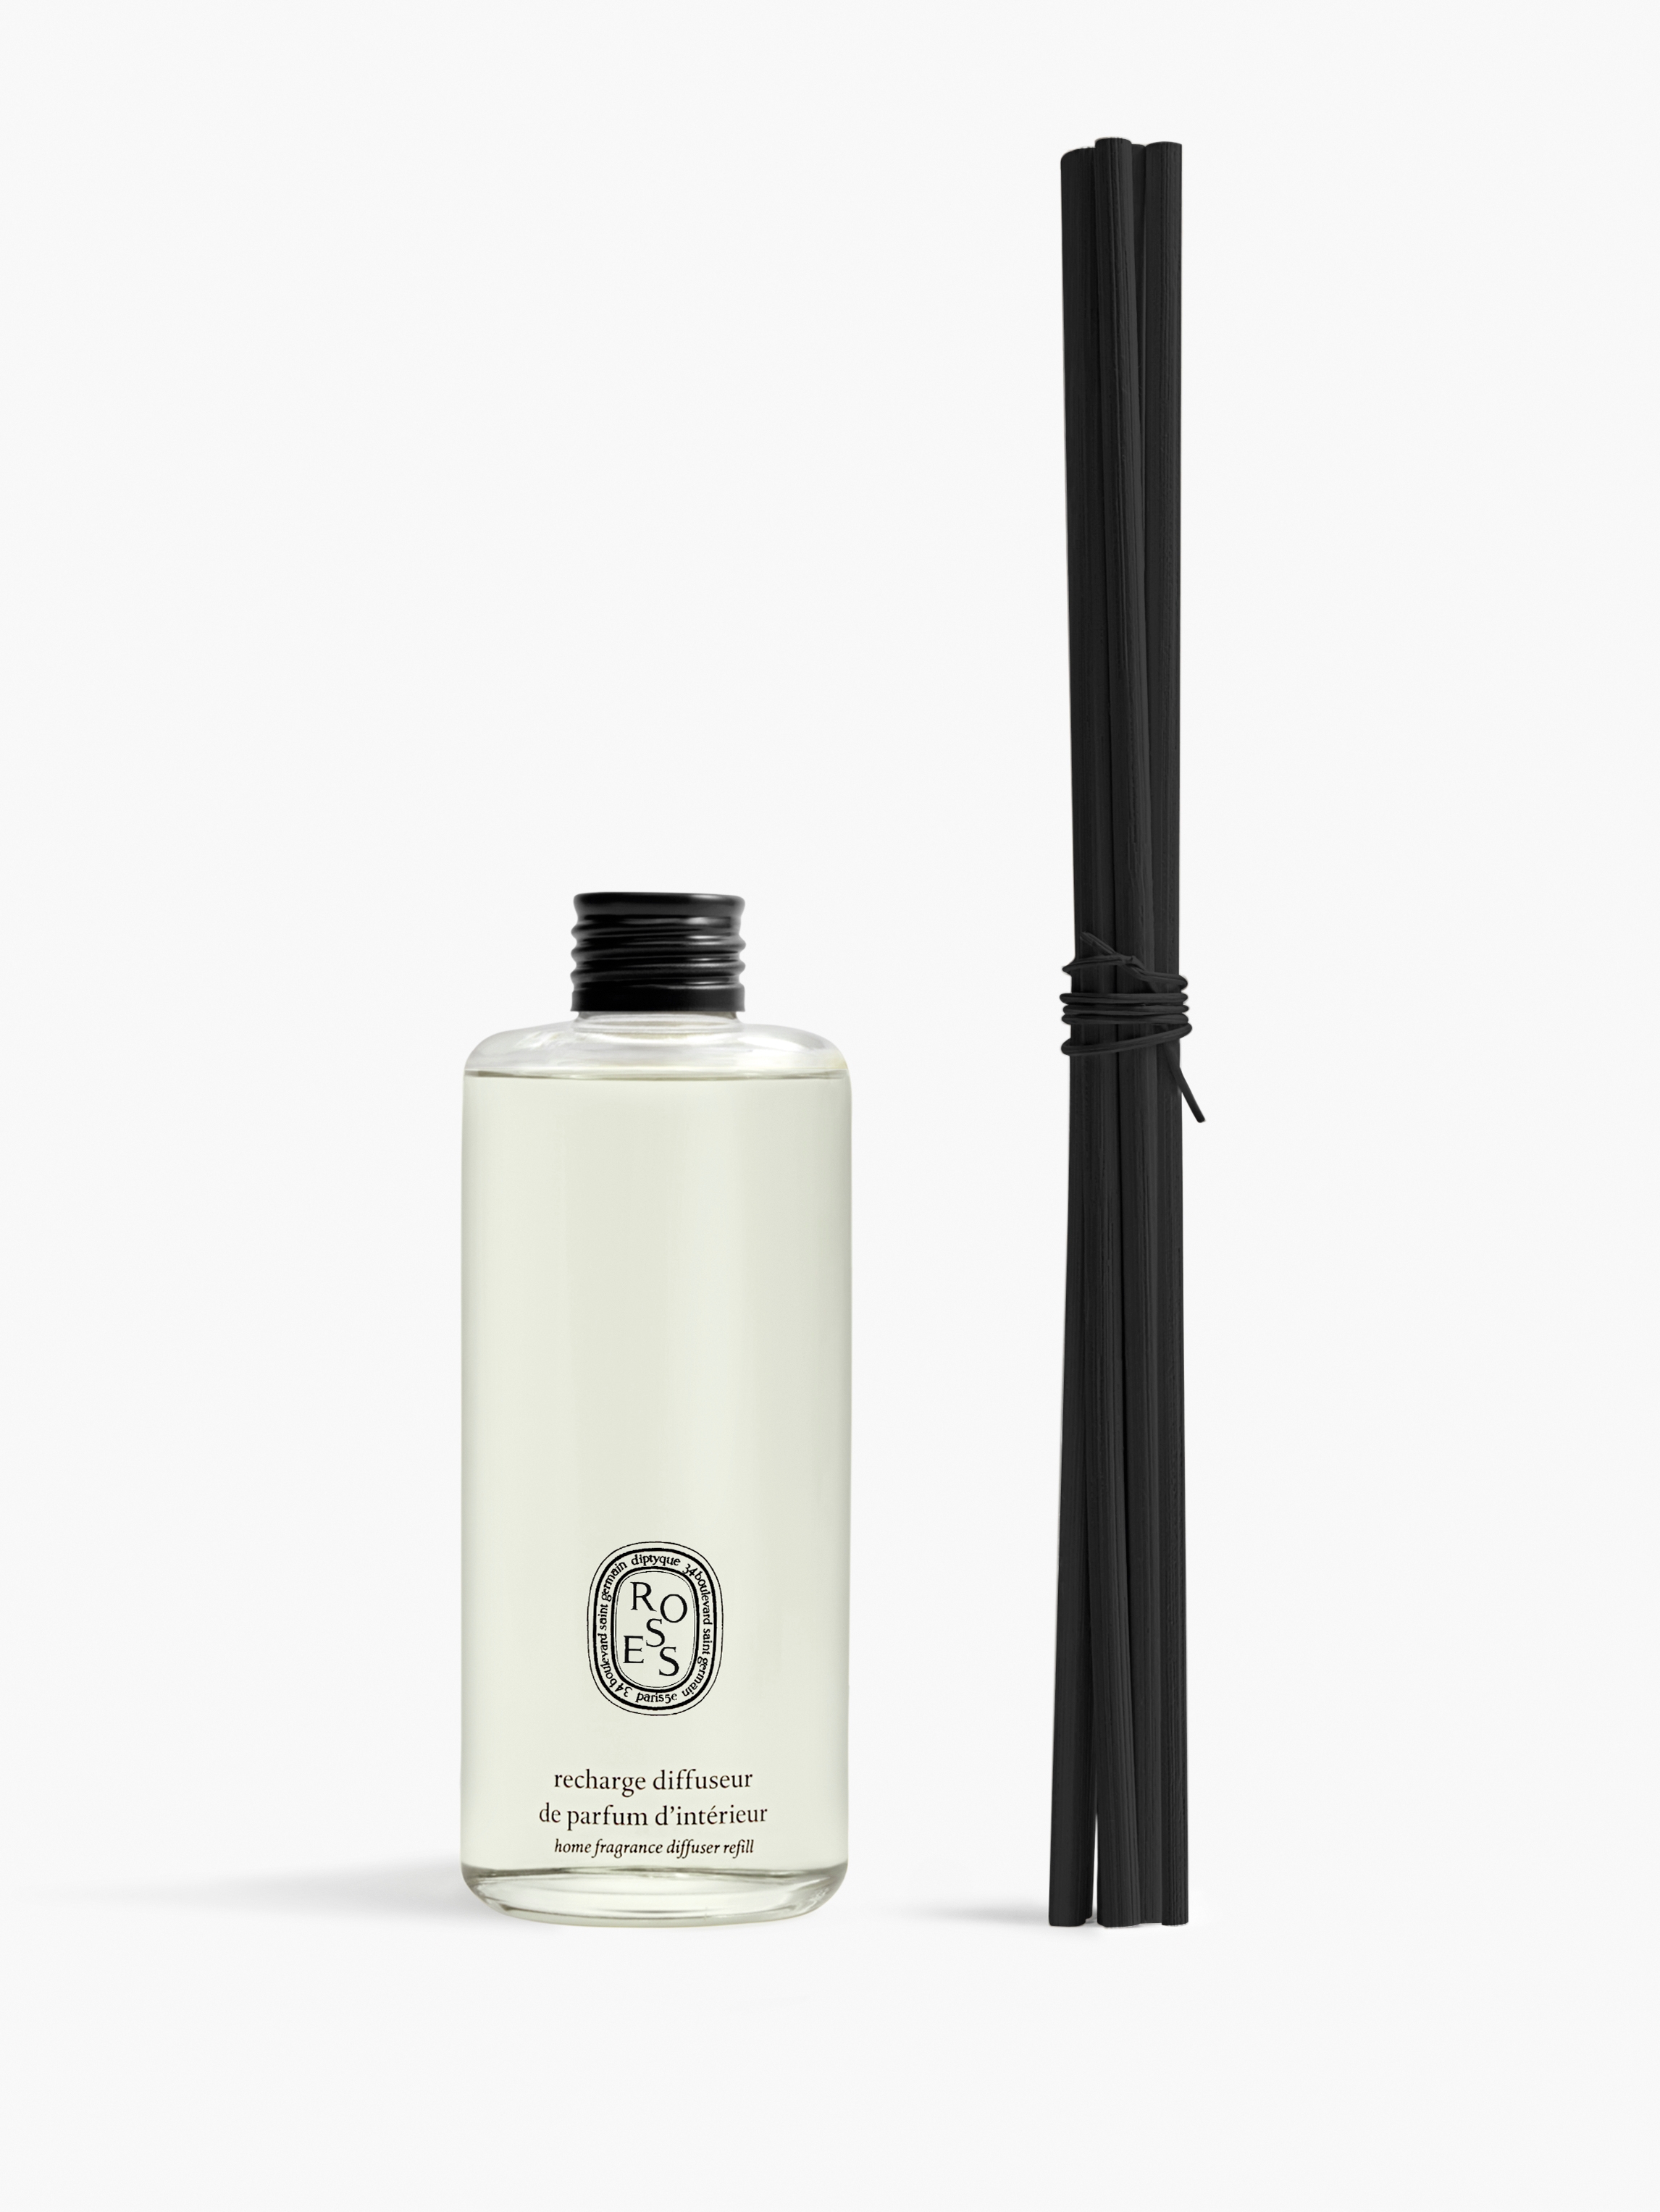 https://www.diptyqueparis.com/media/catalog/product/d/i/diptyque-roses-home-fragrance-diffuser-refill-refreedro-2.jpg?quality=100&bg-color=255,255,255&fit=bounds&height=&width=